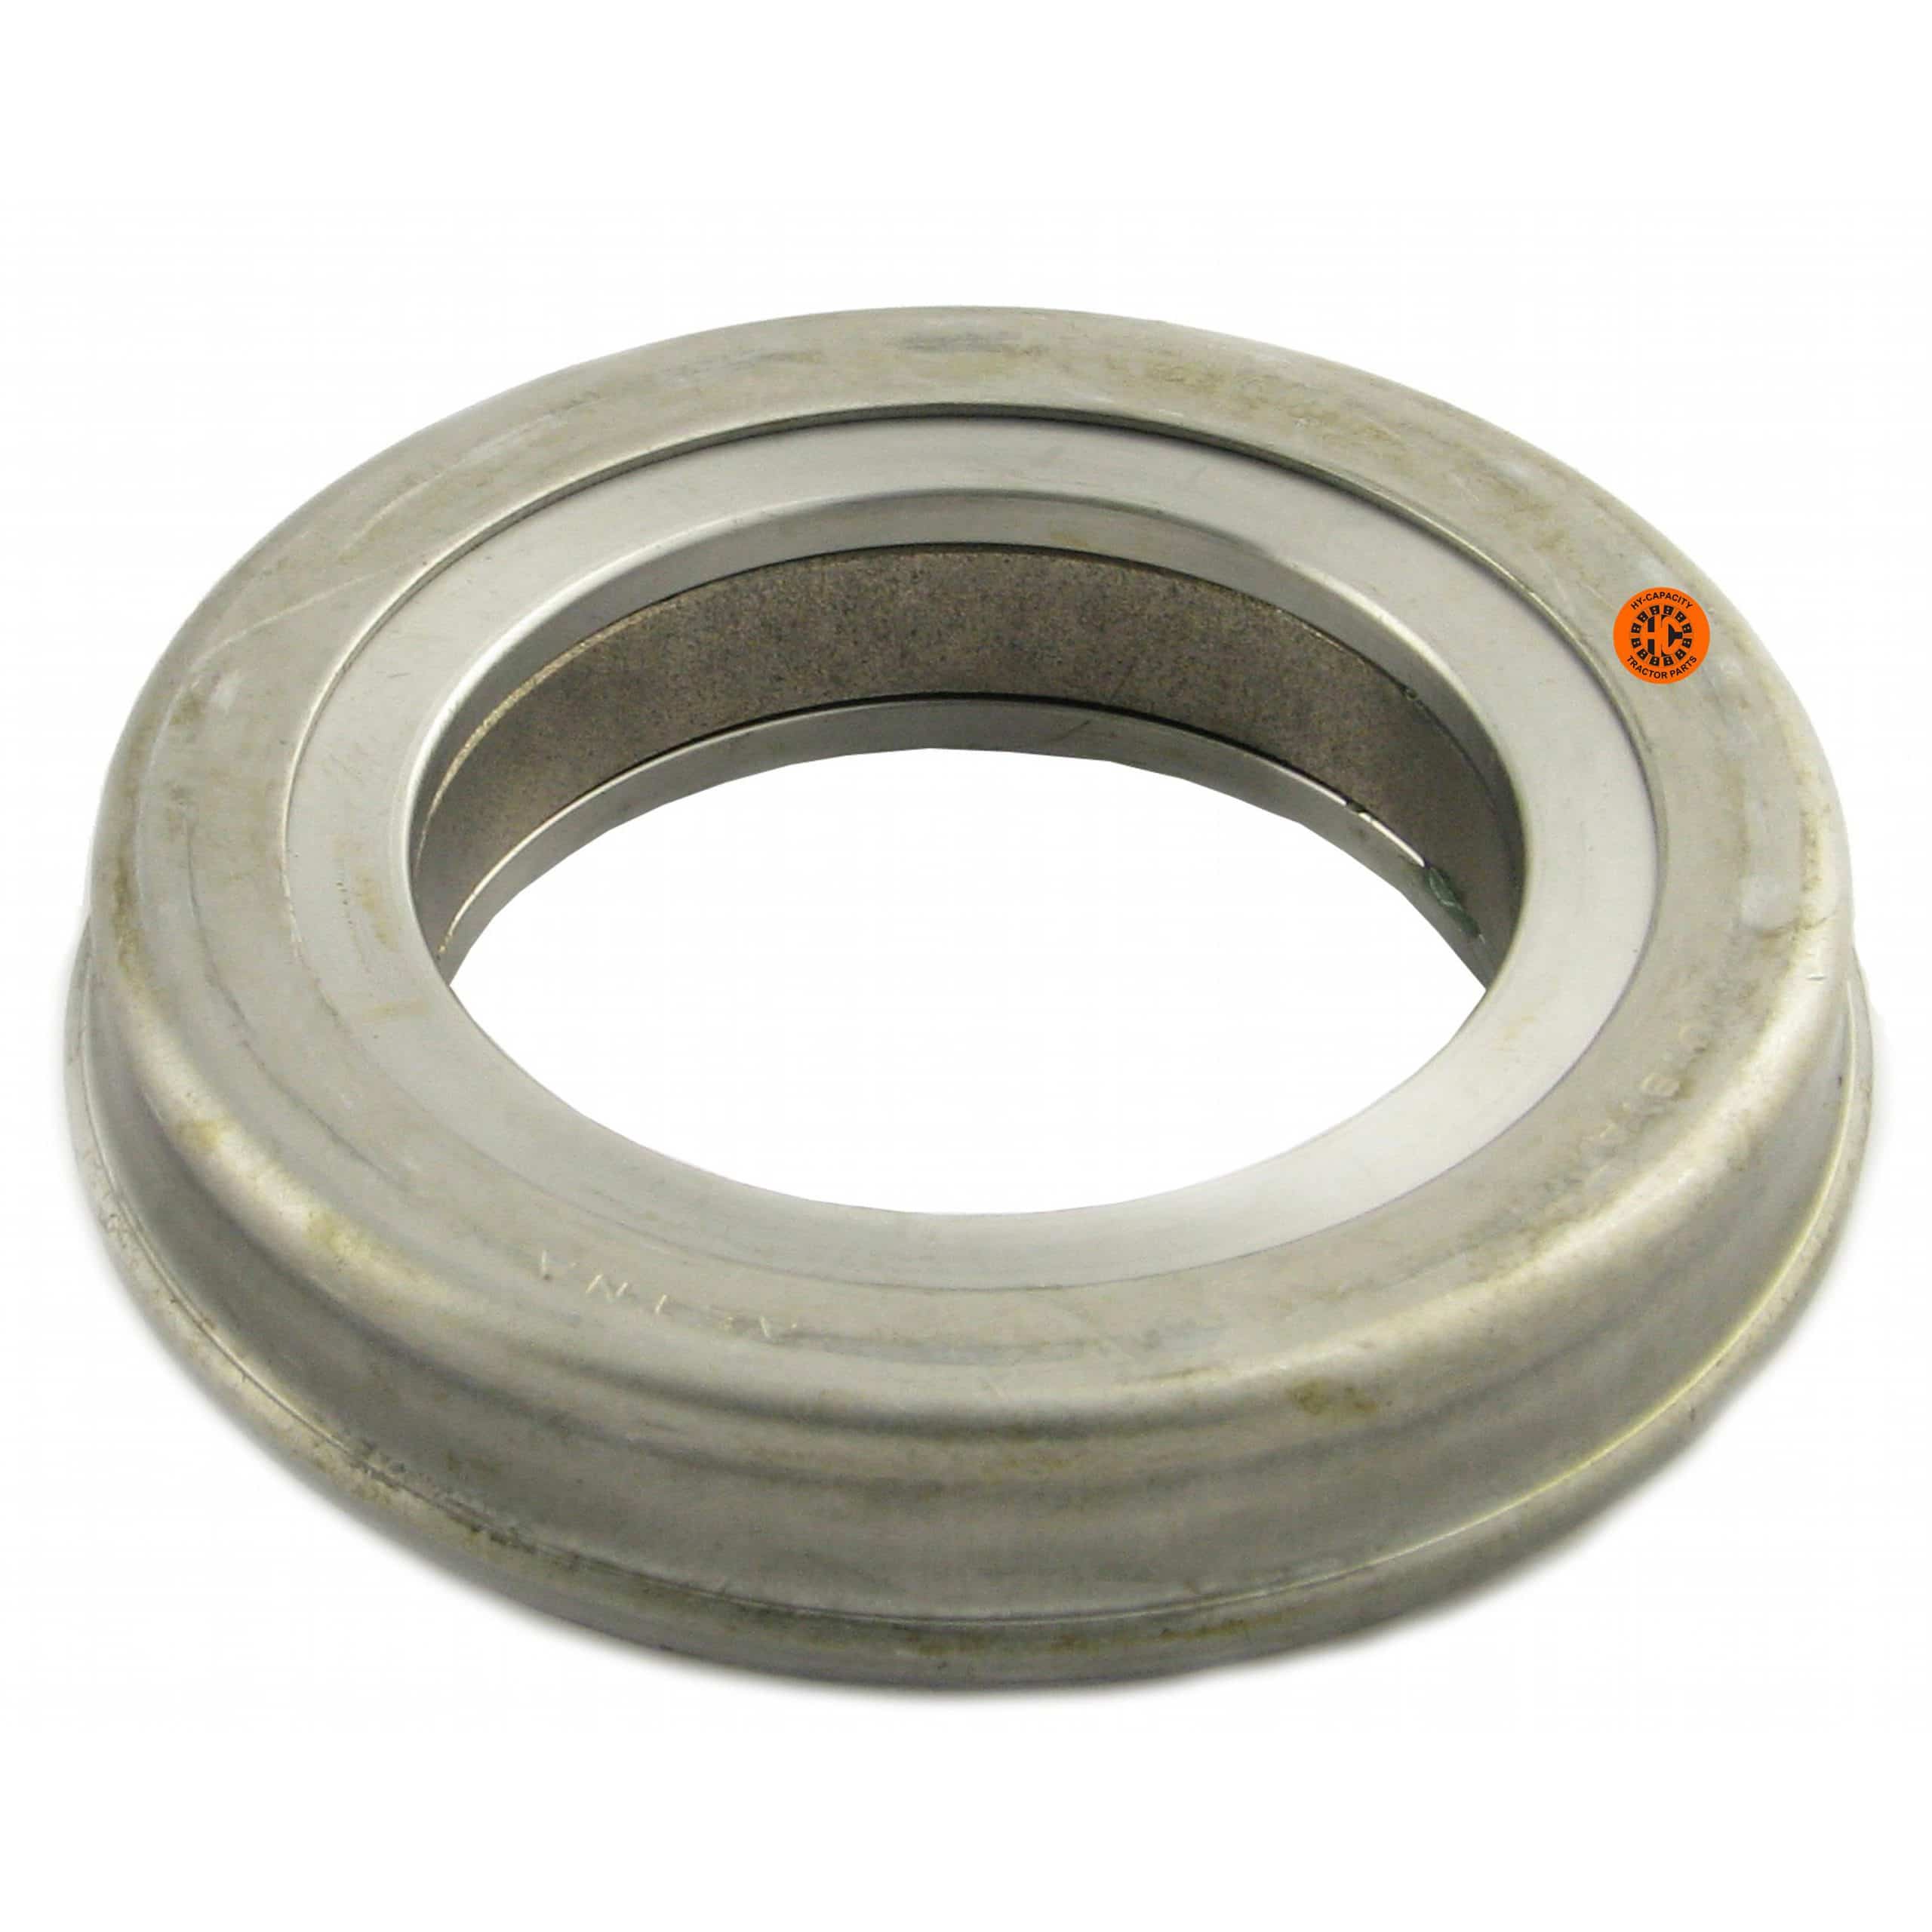 1 Pcs Release Bearing 8301338 1.572 ID Compatible with International 234 #AA69DL 254 244 